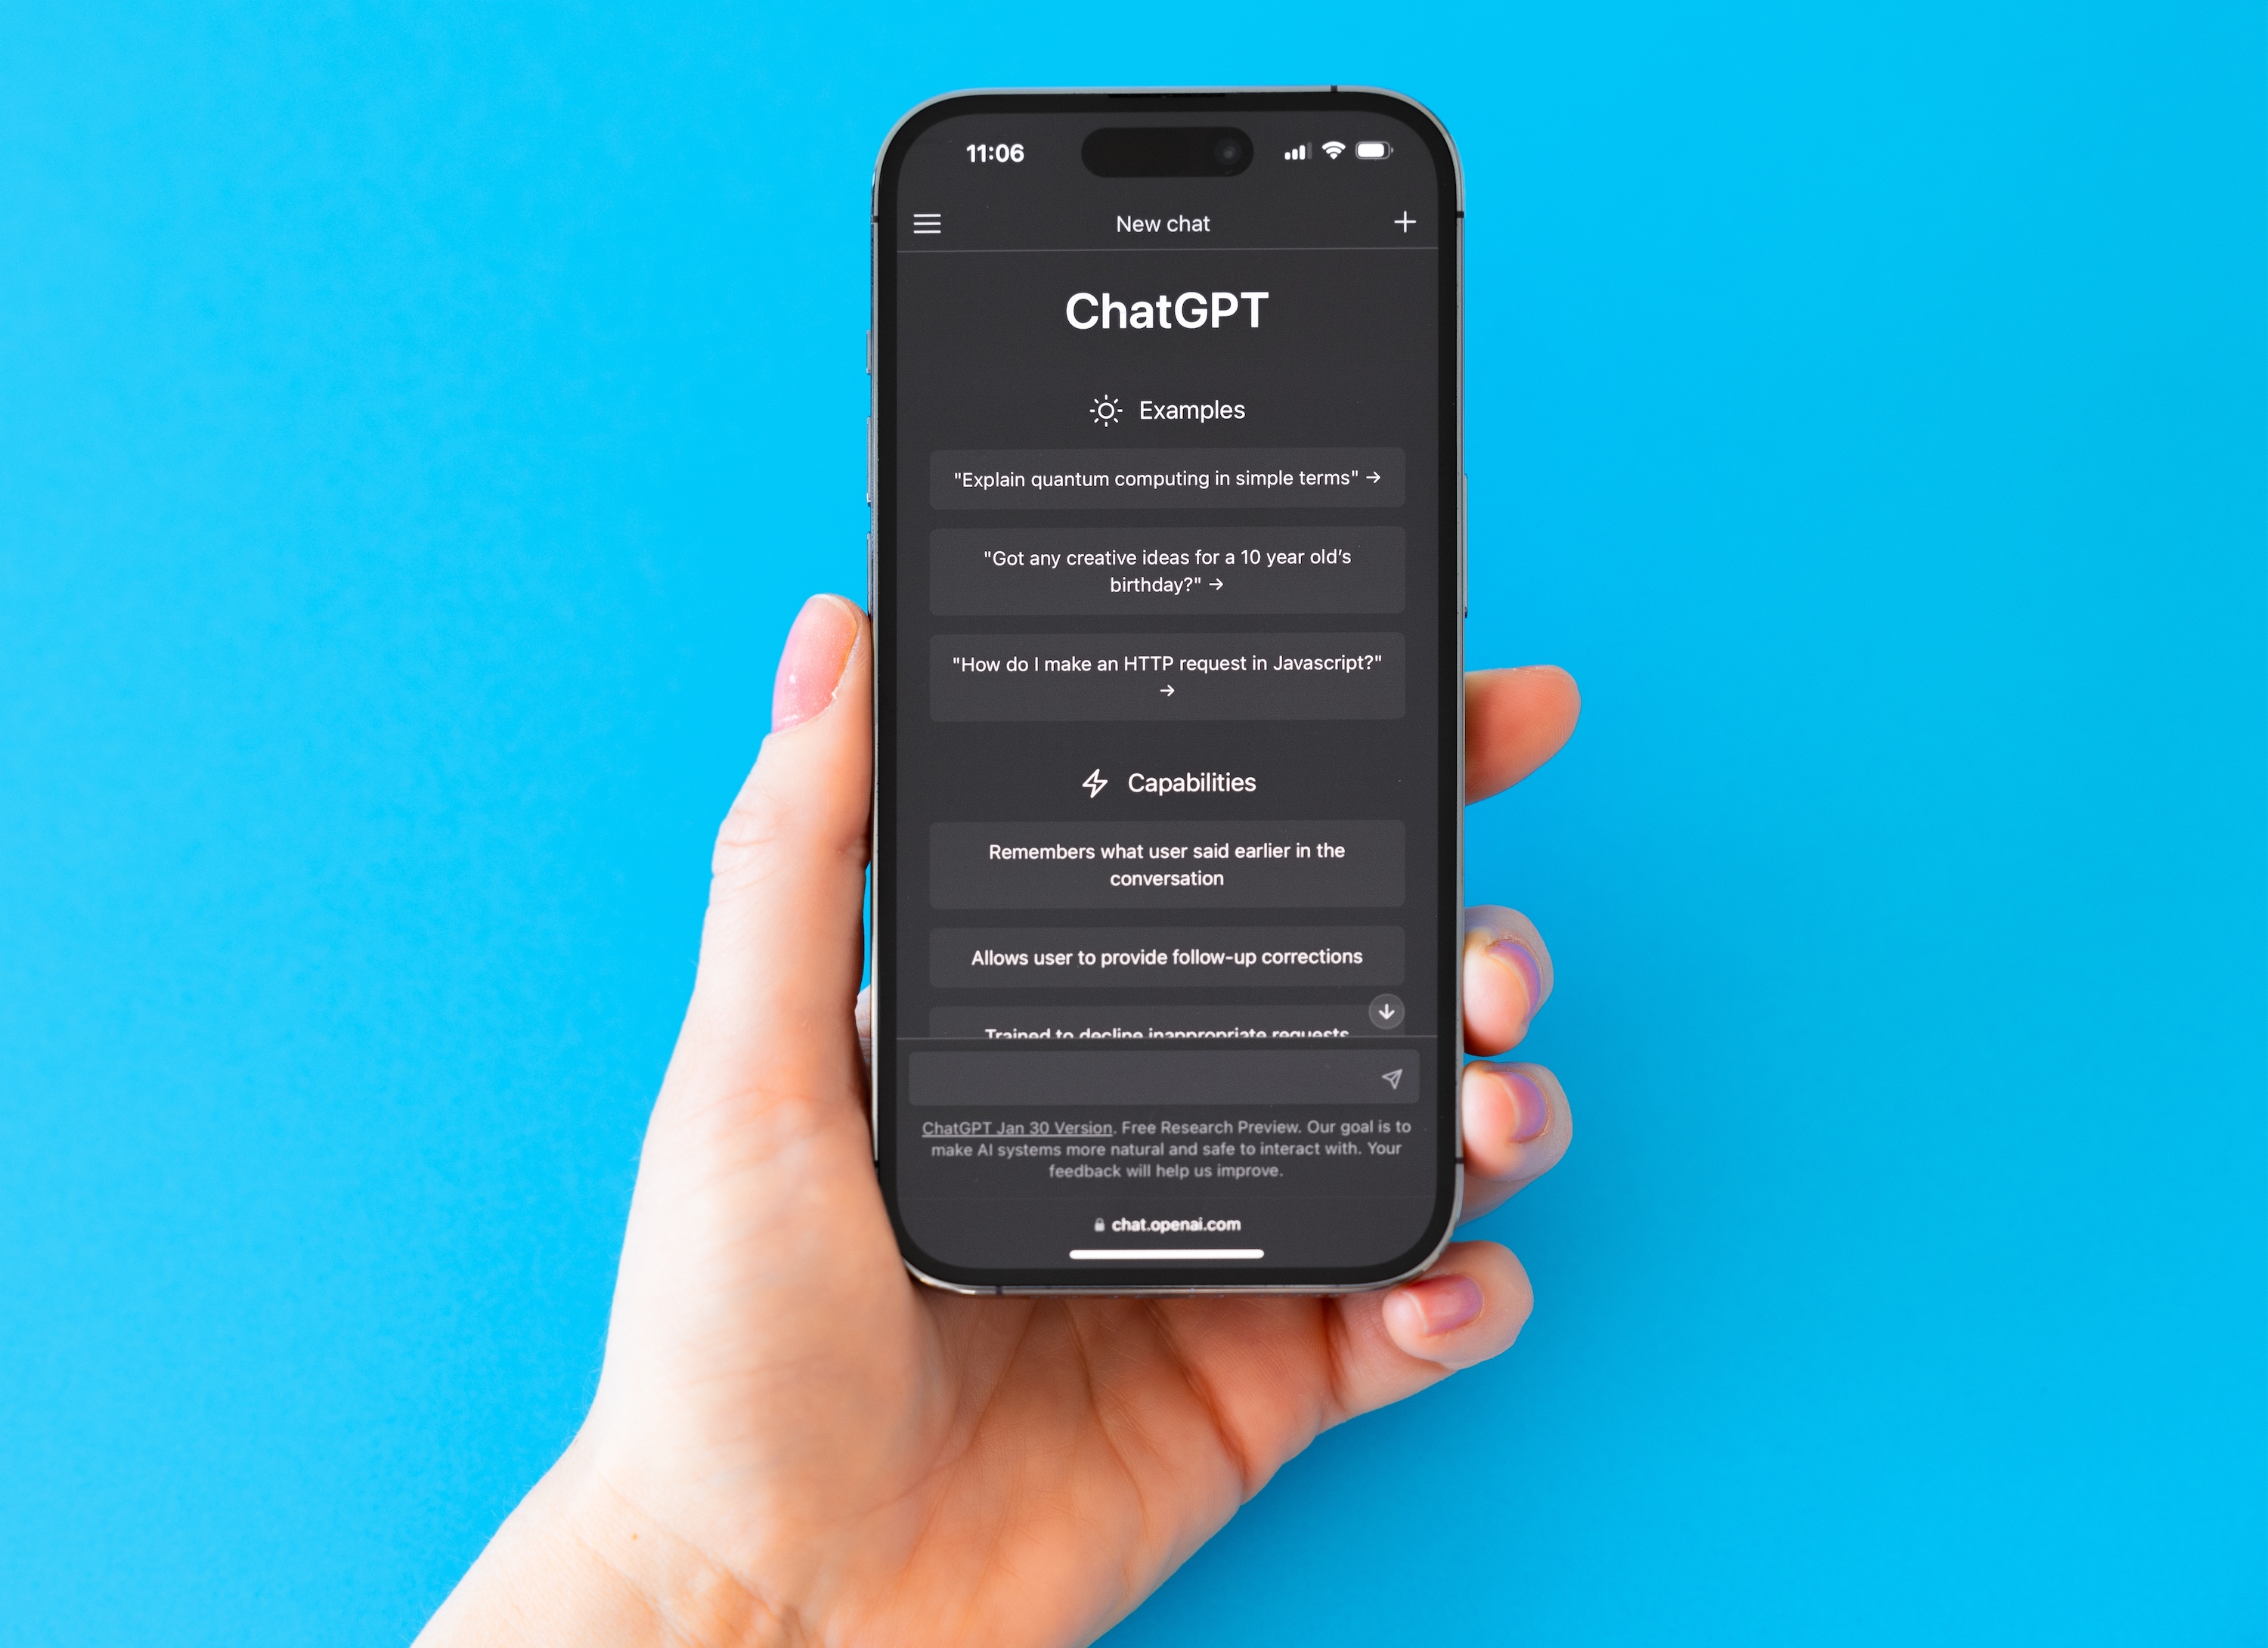 Chatgpt app latest update includes custom instructions